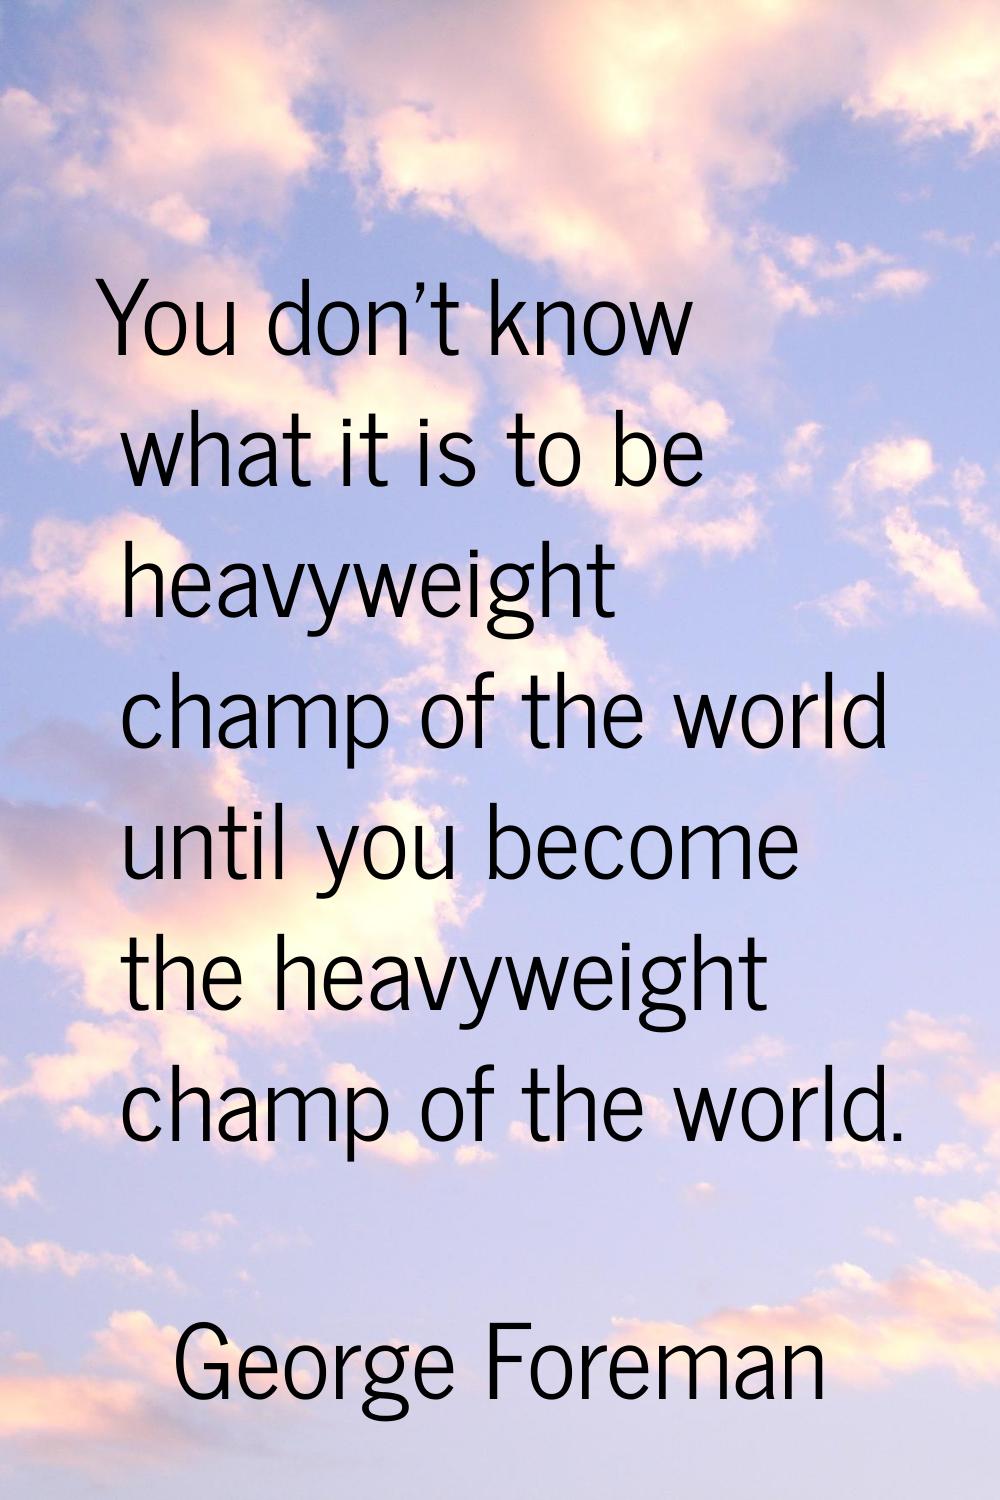 You don't know what it is to be heavyweight champ of the world until you become the heavyweight cha